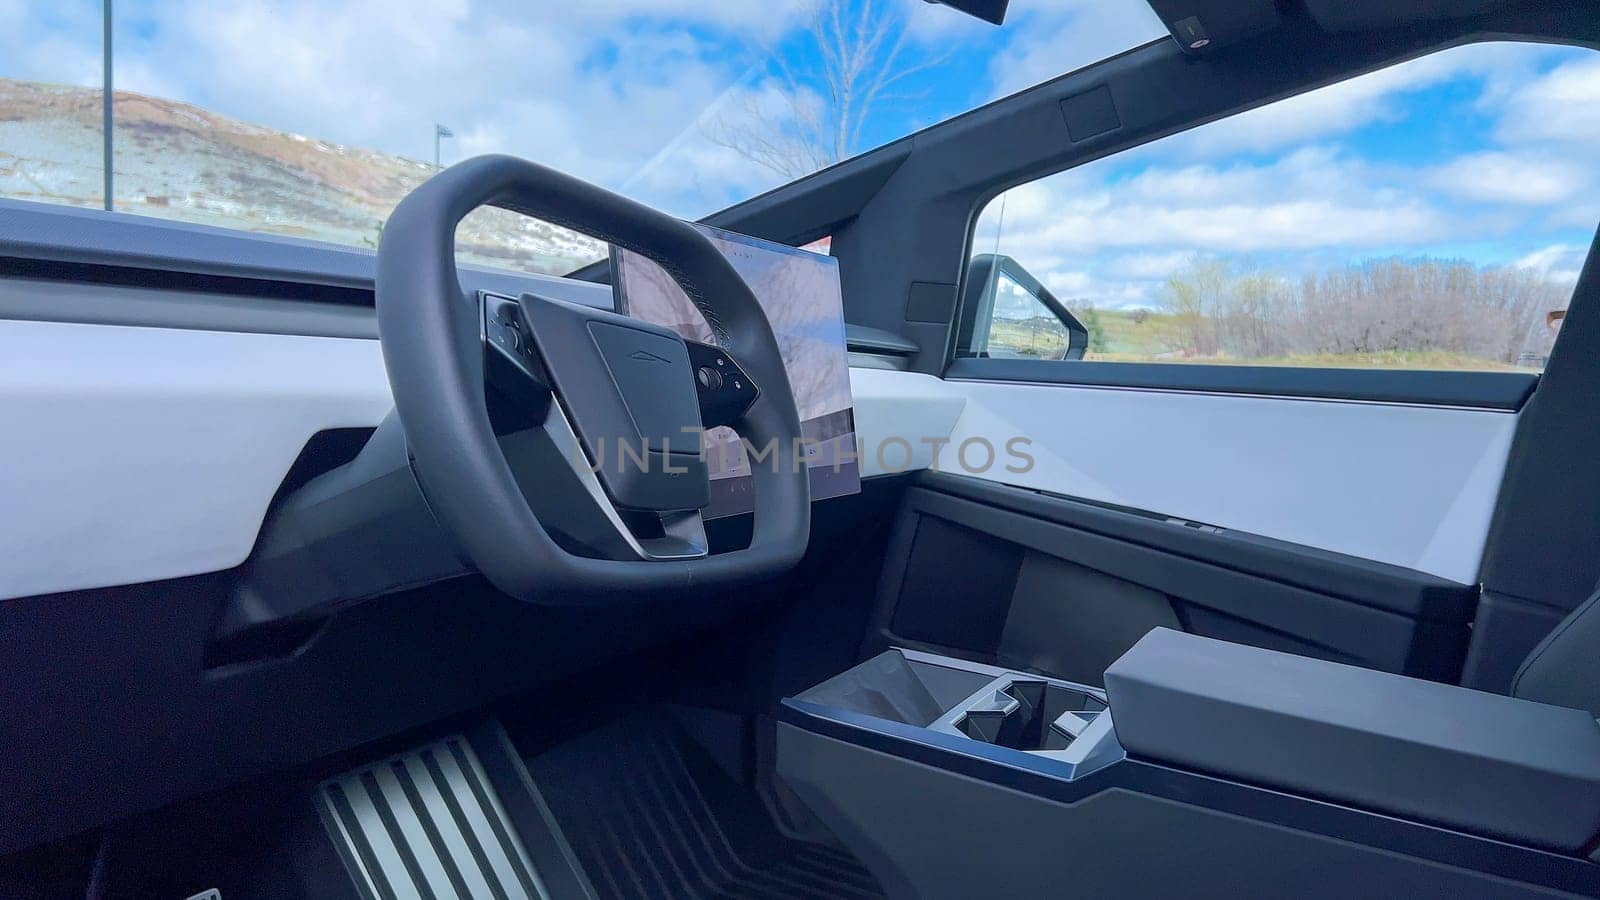 Inside the Tesla Cybertruck: A View from the Driver Seat by arinahabich